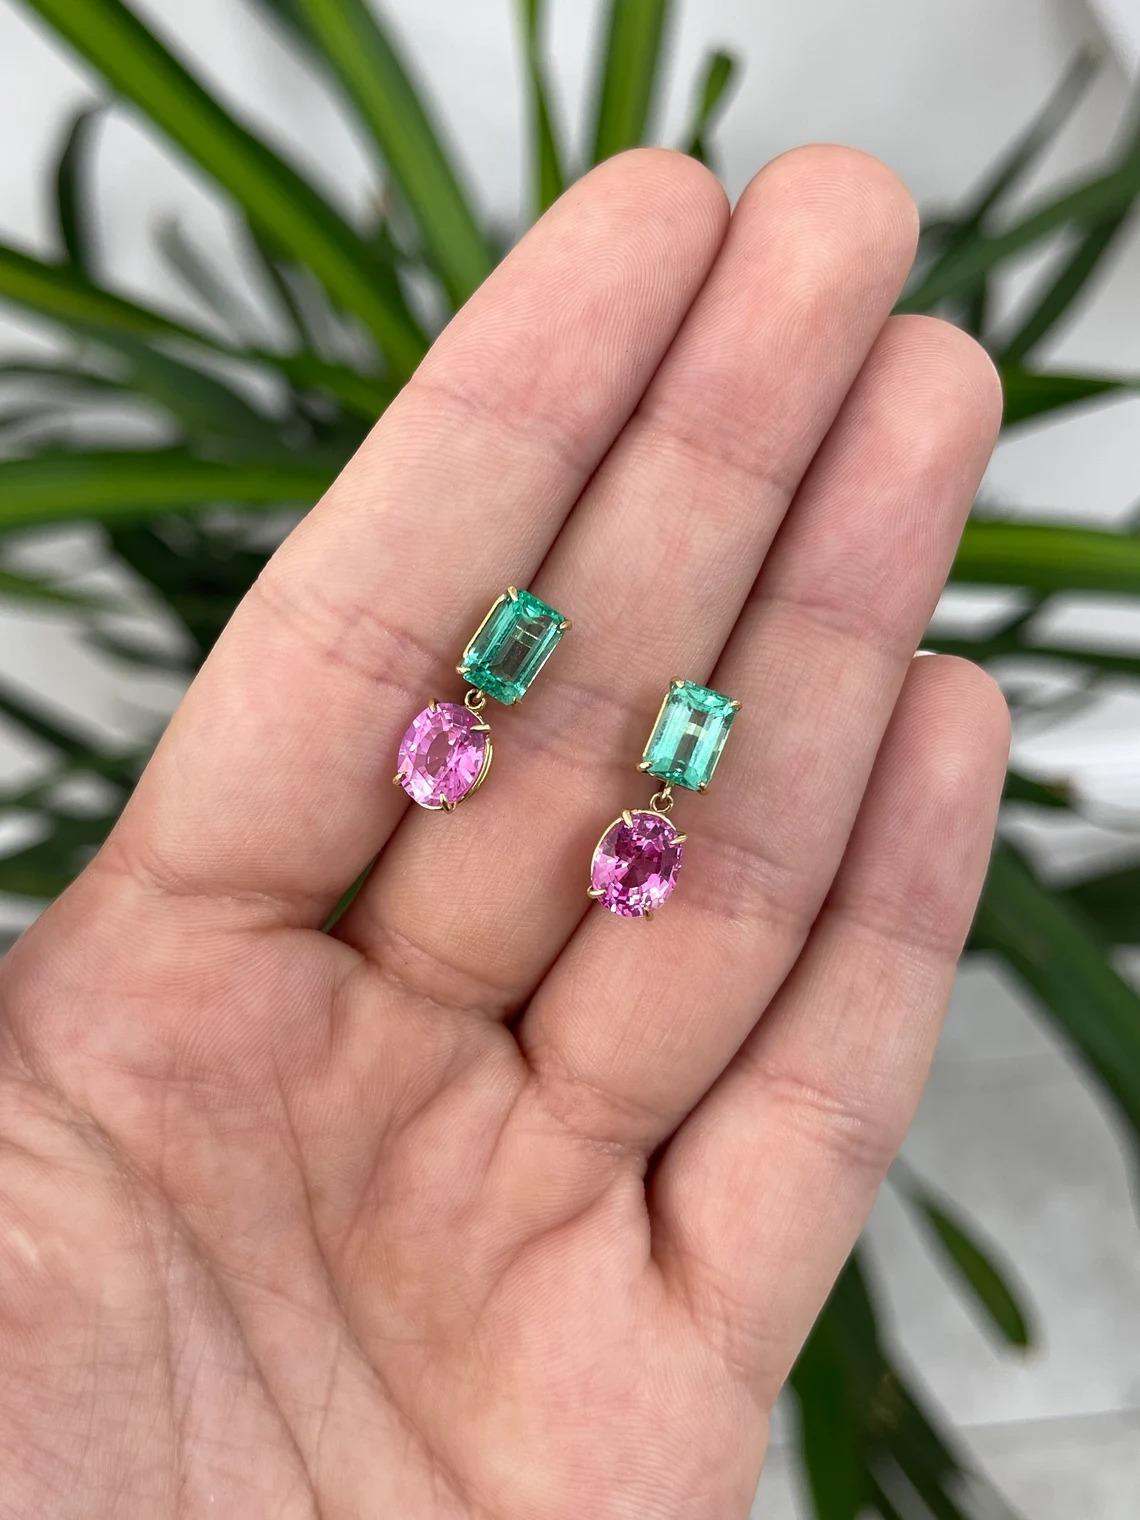 A remarkable pair of natural emerald and pink sapphire dangle earrings. Starting at the top we have a stunning pair of natural Colombian emerald cut emeralds; showcasing a vivid electric green color, excellent luster, and clarity. Dangling are two